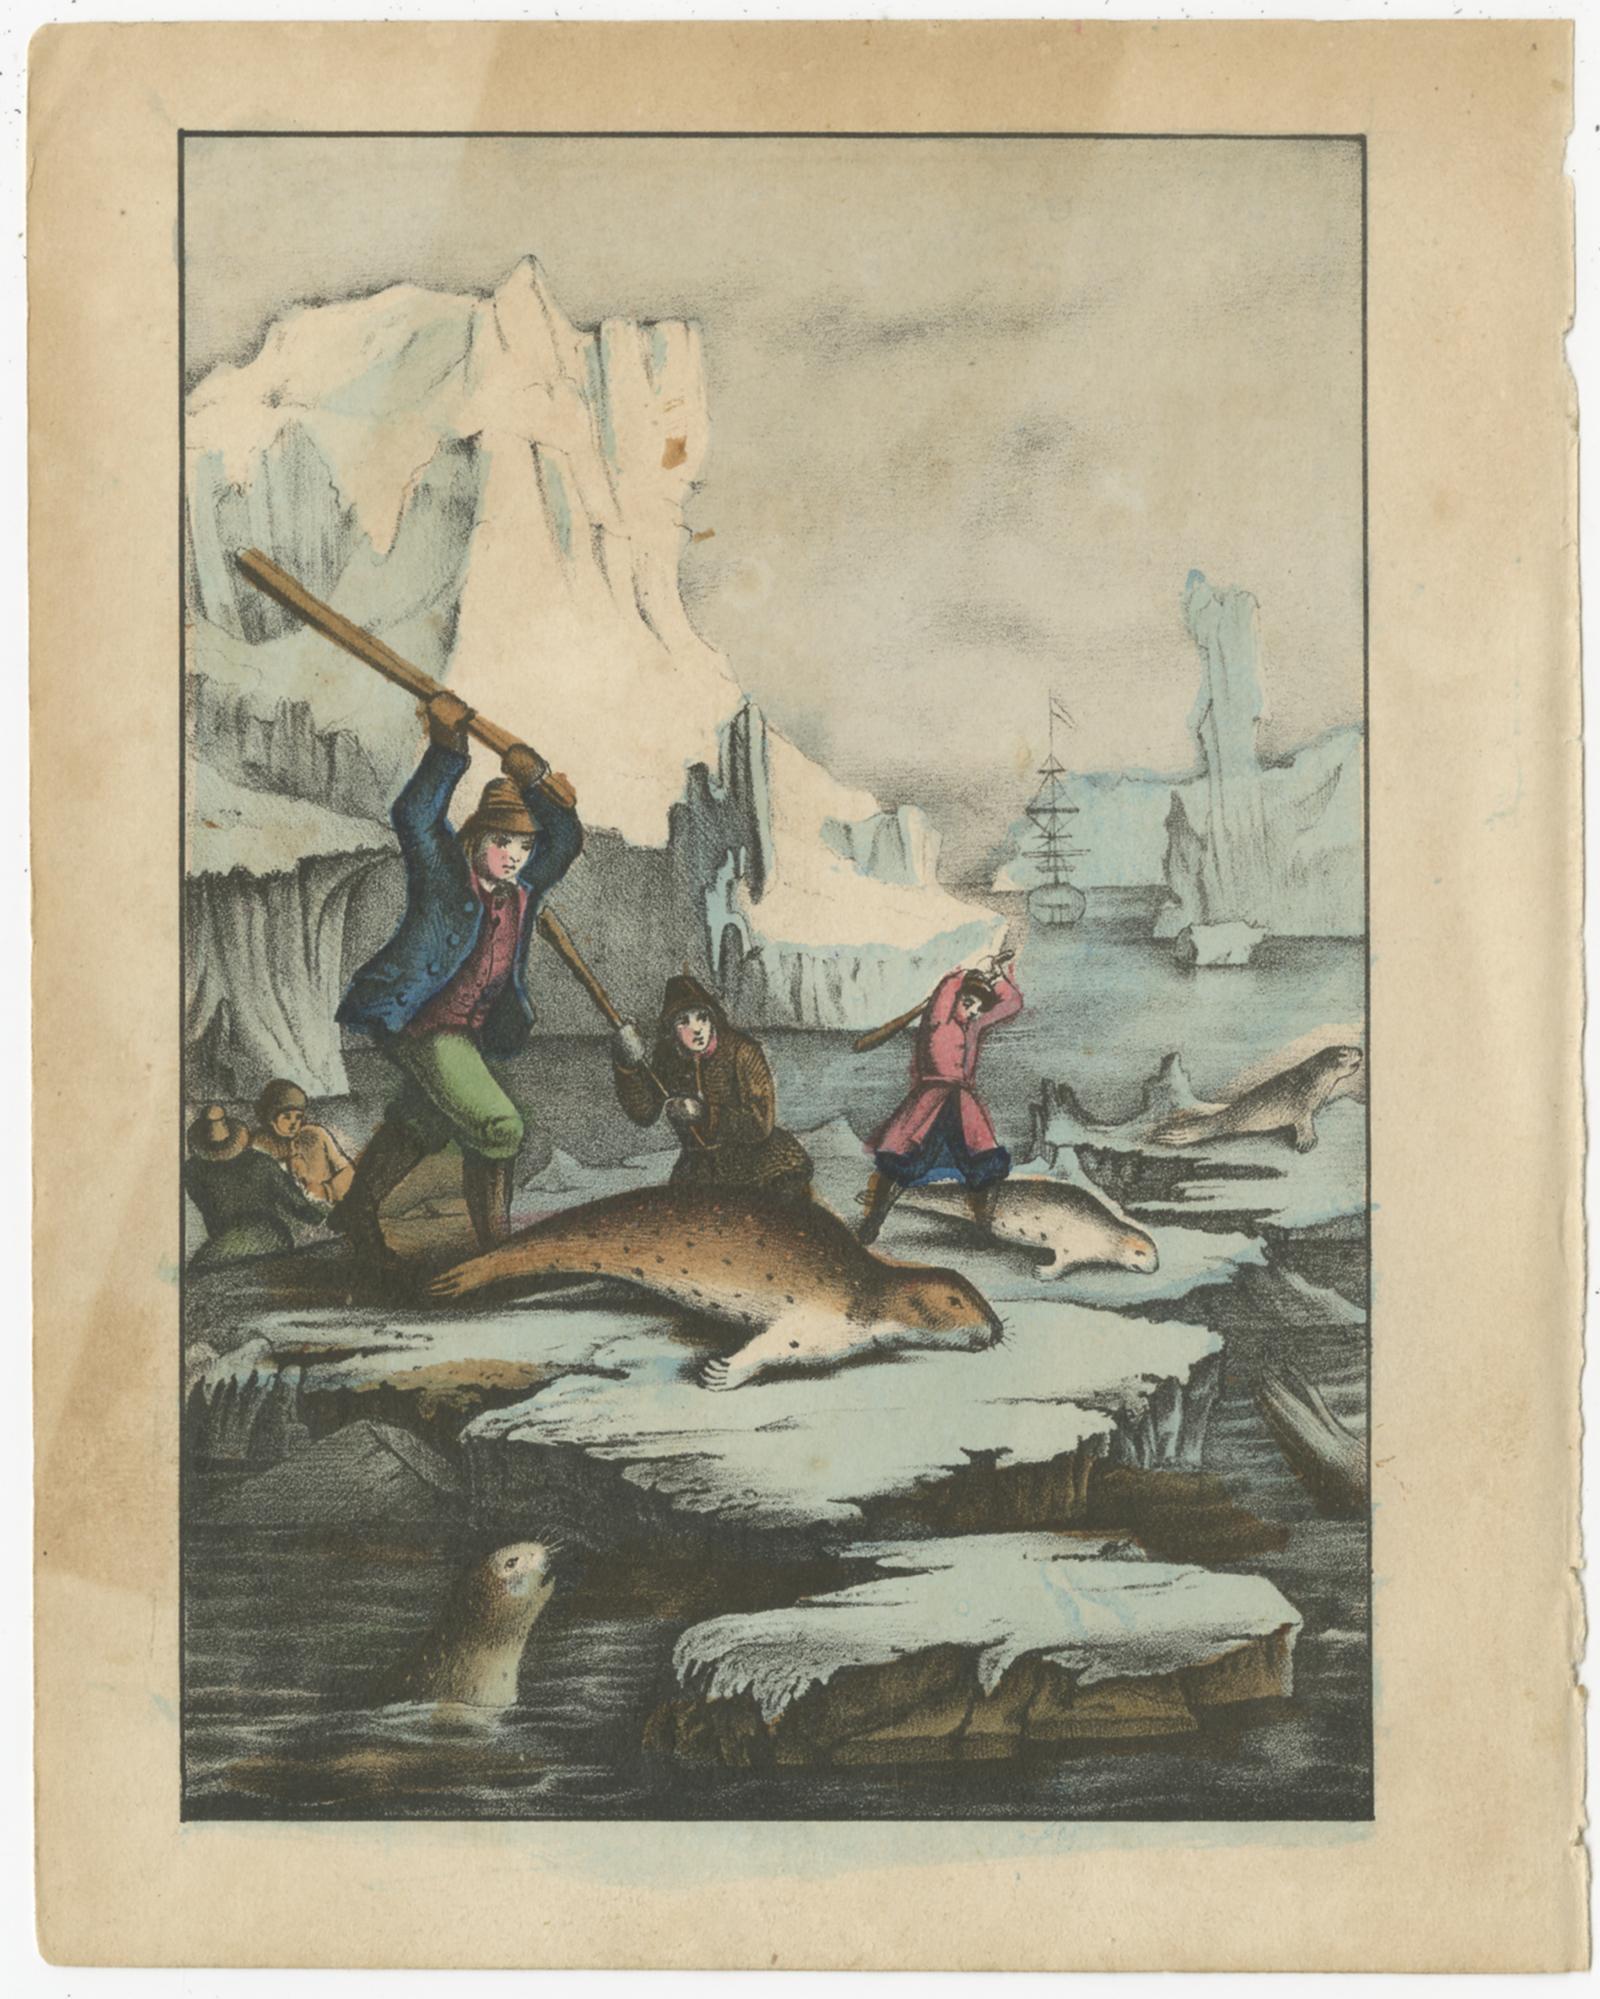 Set of eight antique prints of various animals and hunting scenes including a snake, monkeys, polar bears, elephant hunting, seal hunting and others. Source unknown, to be determined. Published circa 1880.